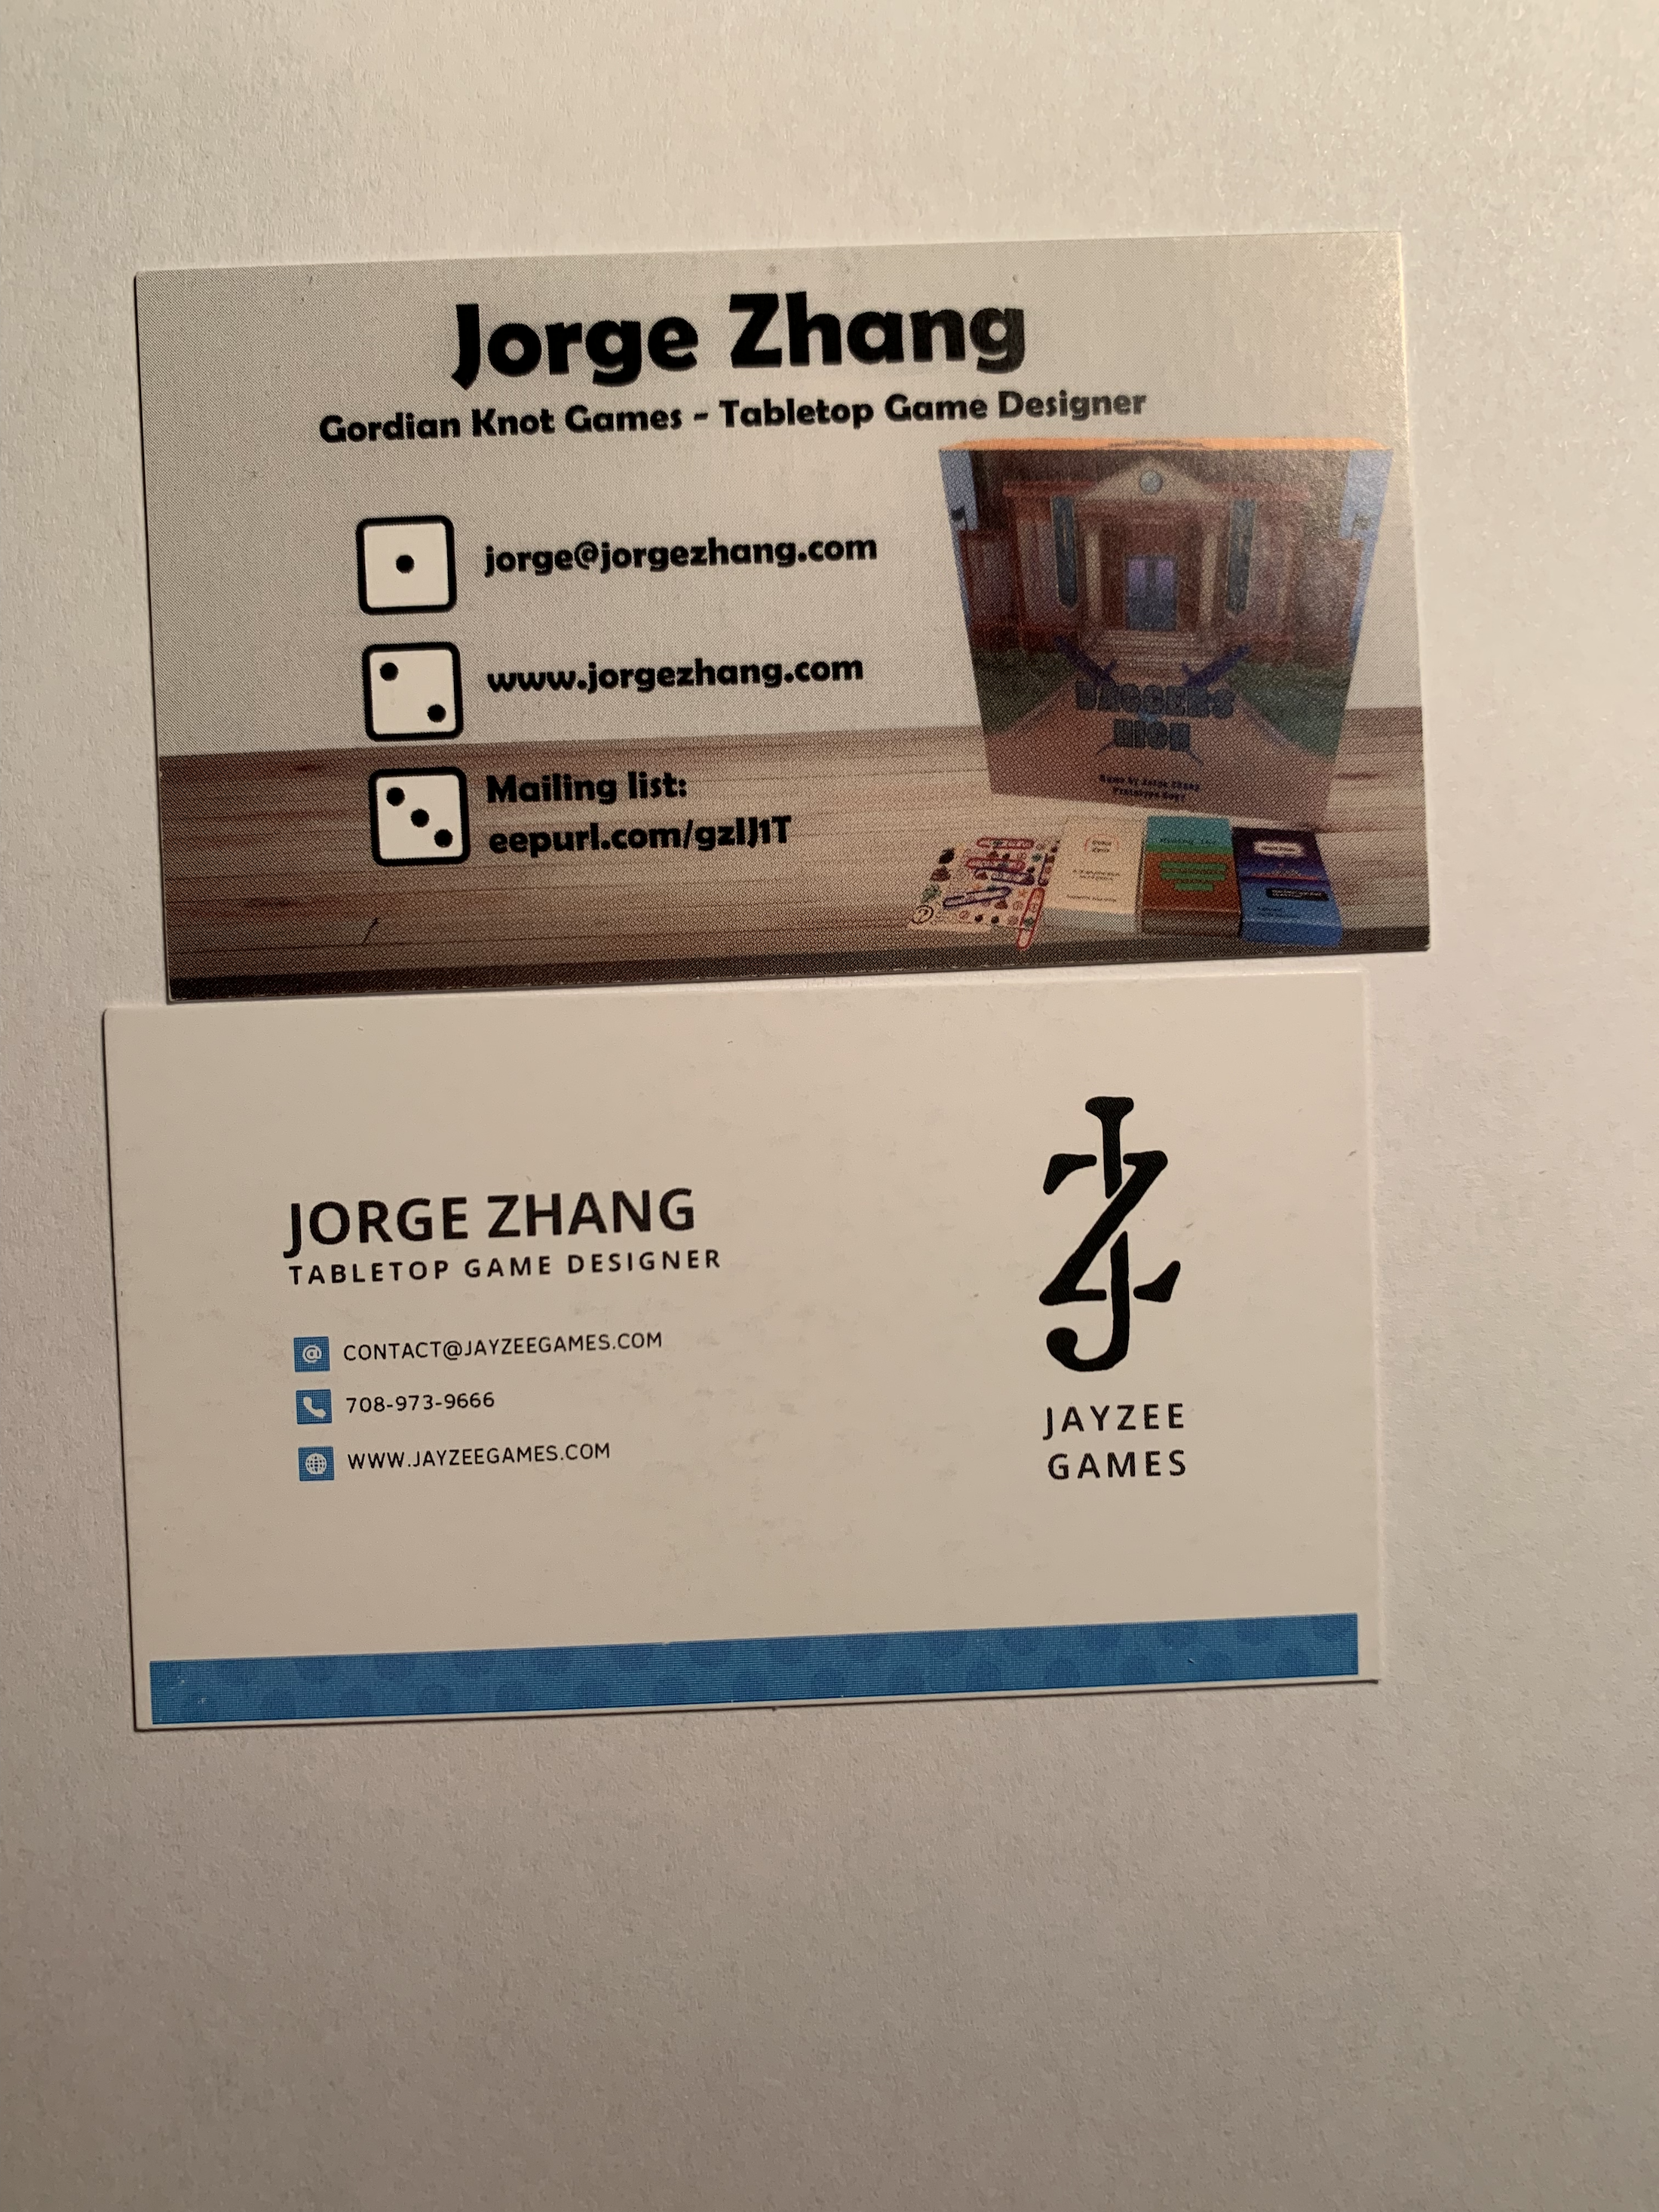 business card front